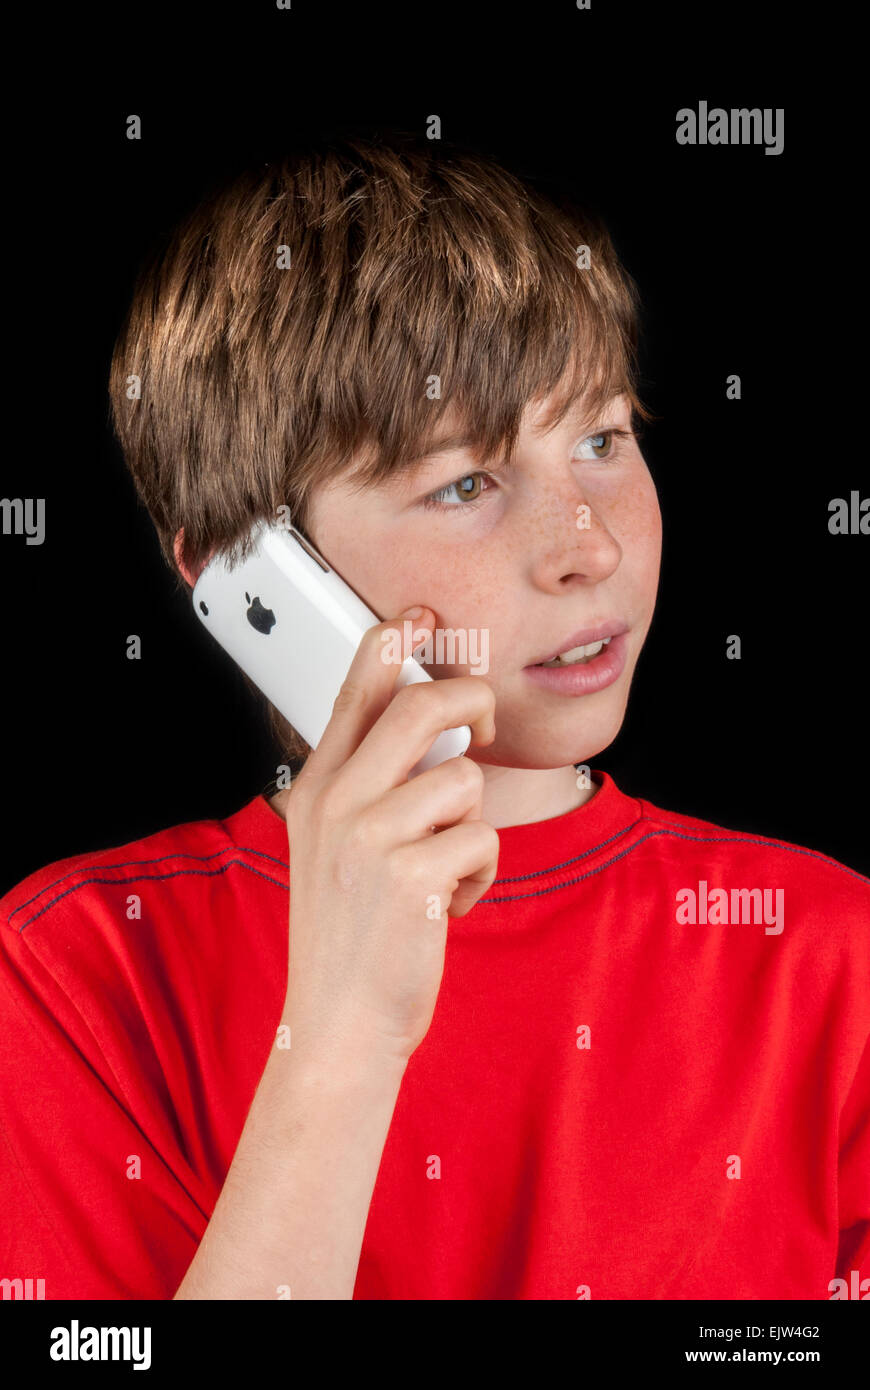 Young Boy Talking on a Apple Iphone 3G Stock Photo